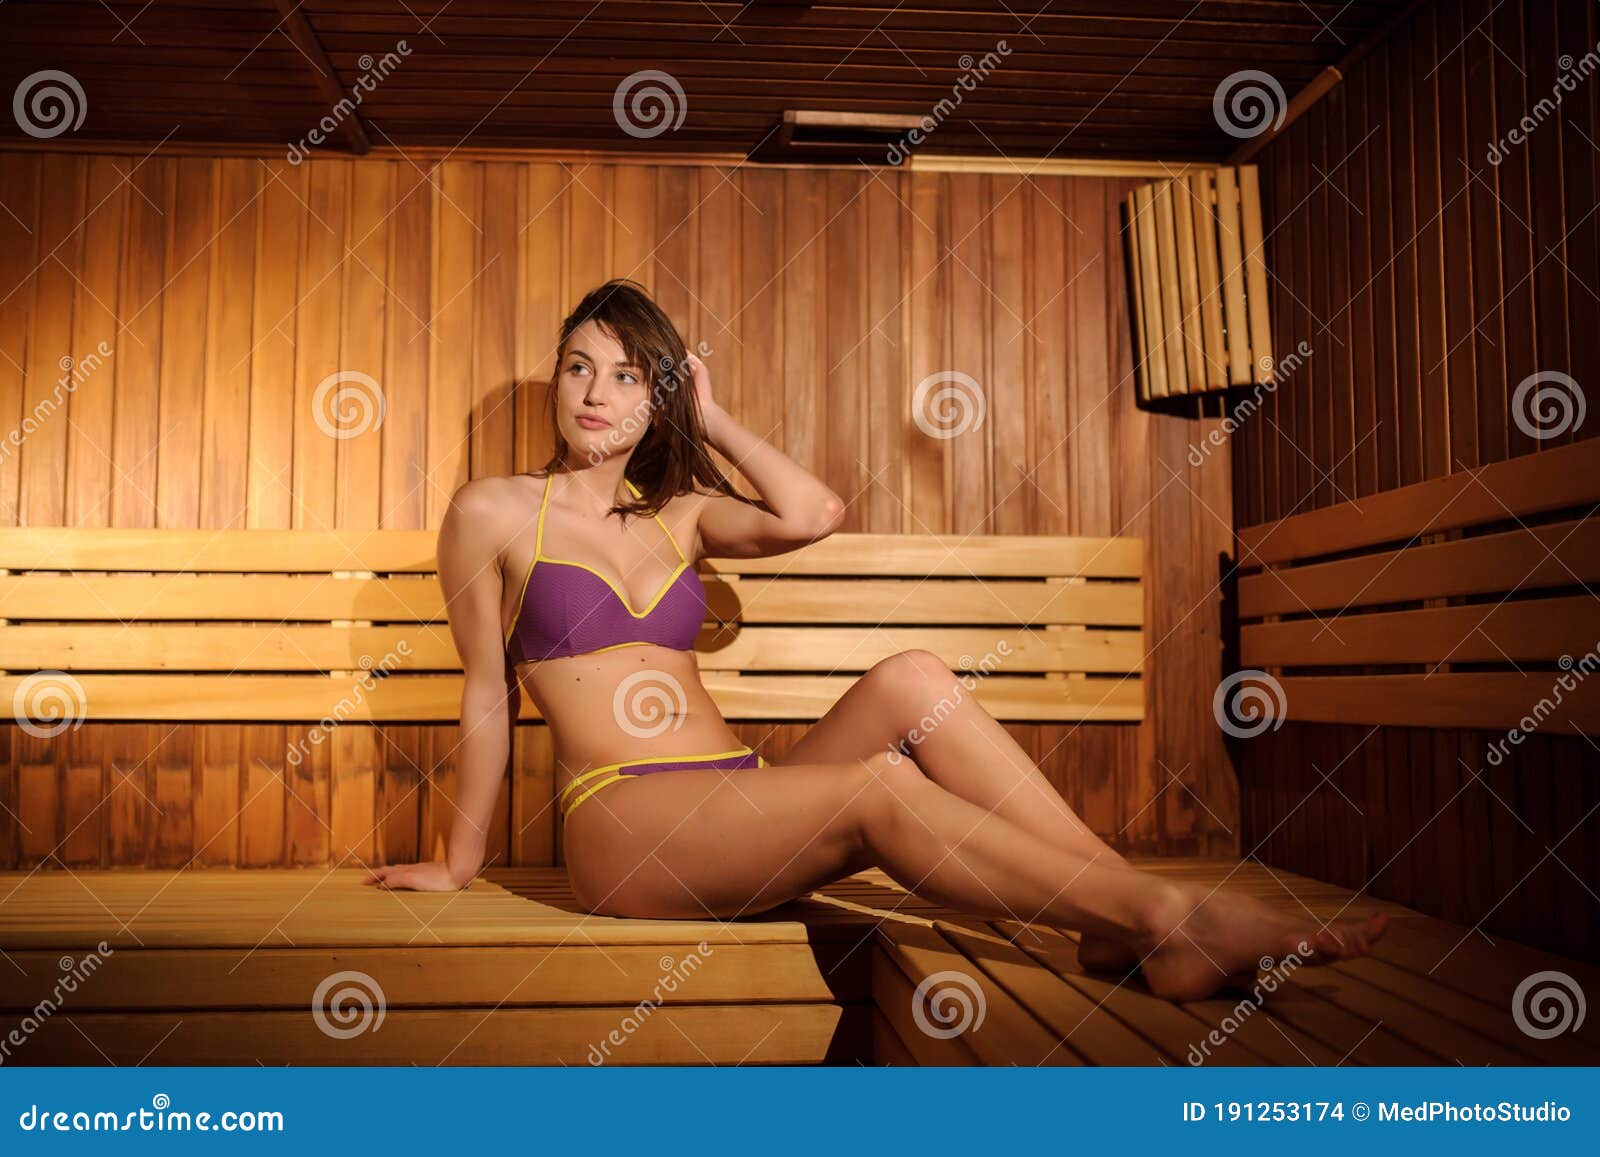 Beautiful Wearing a Swimsuit in a Wooden Sauna Stock Photo - Image of 191253174